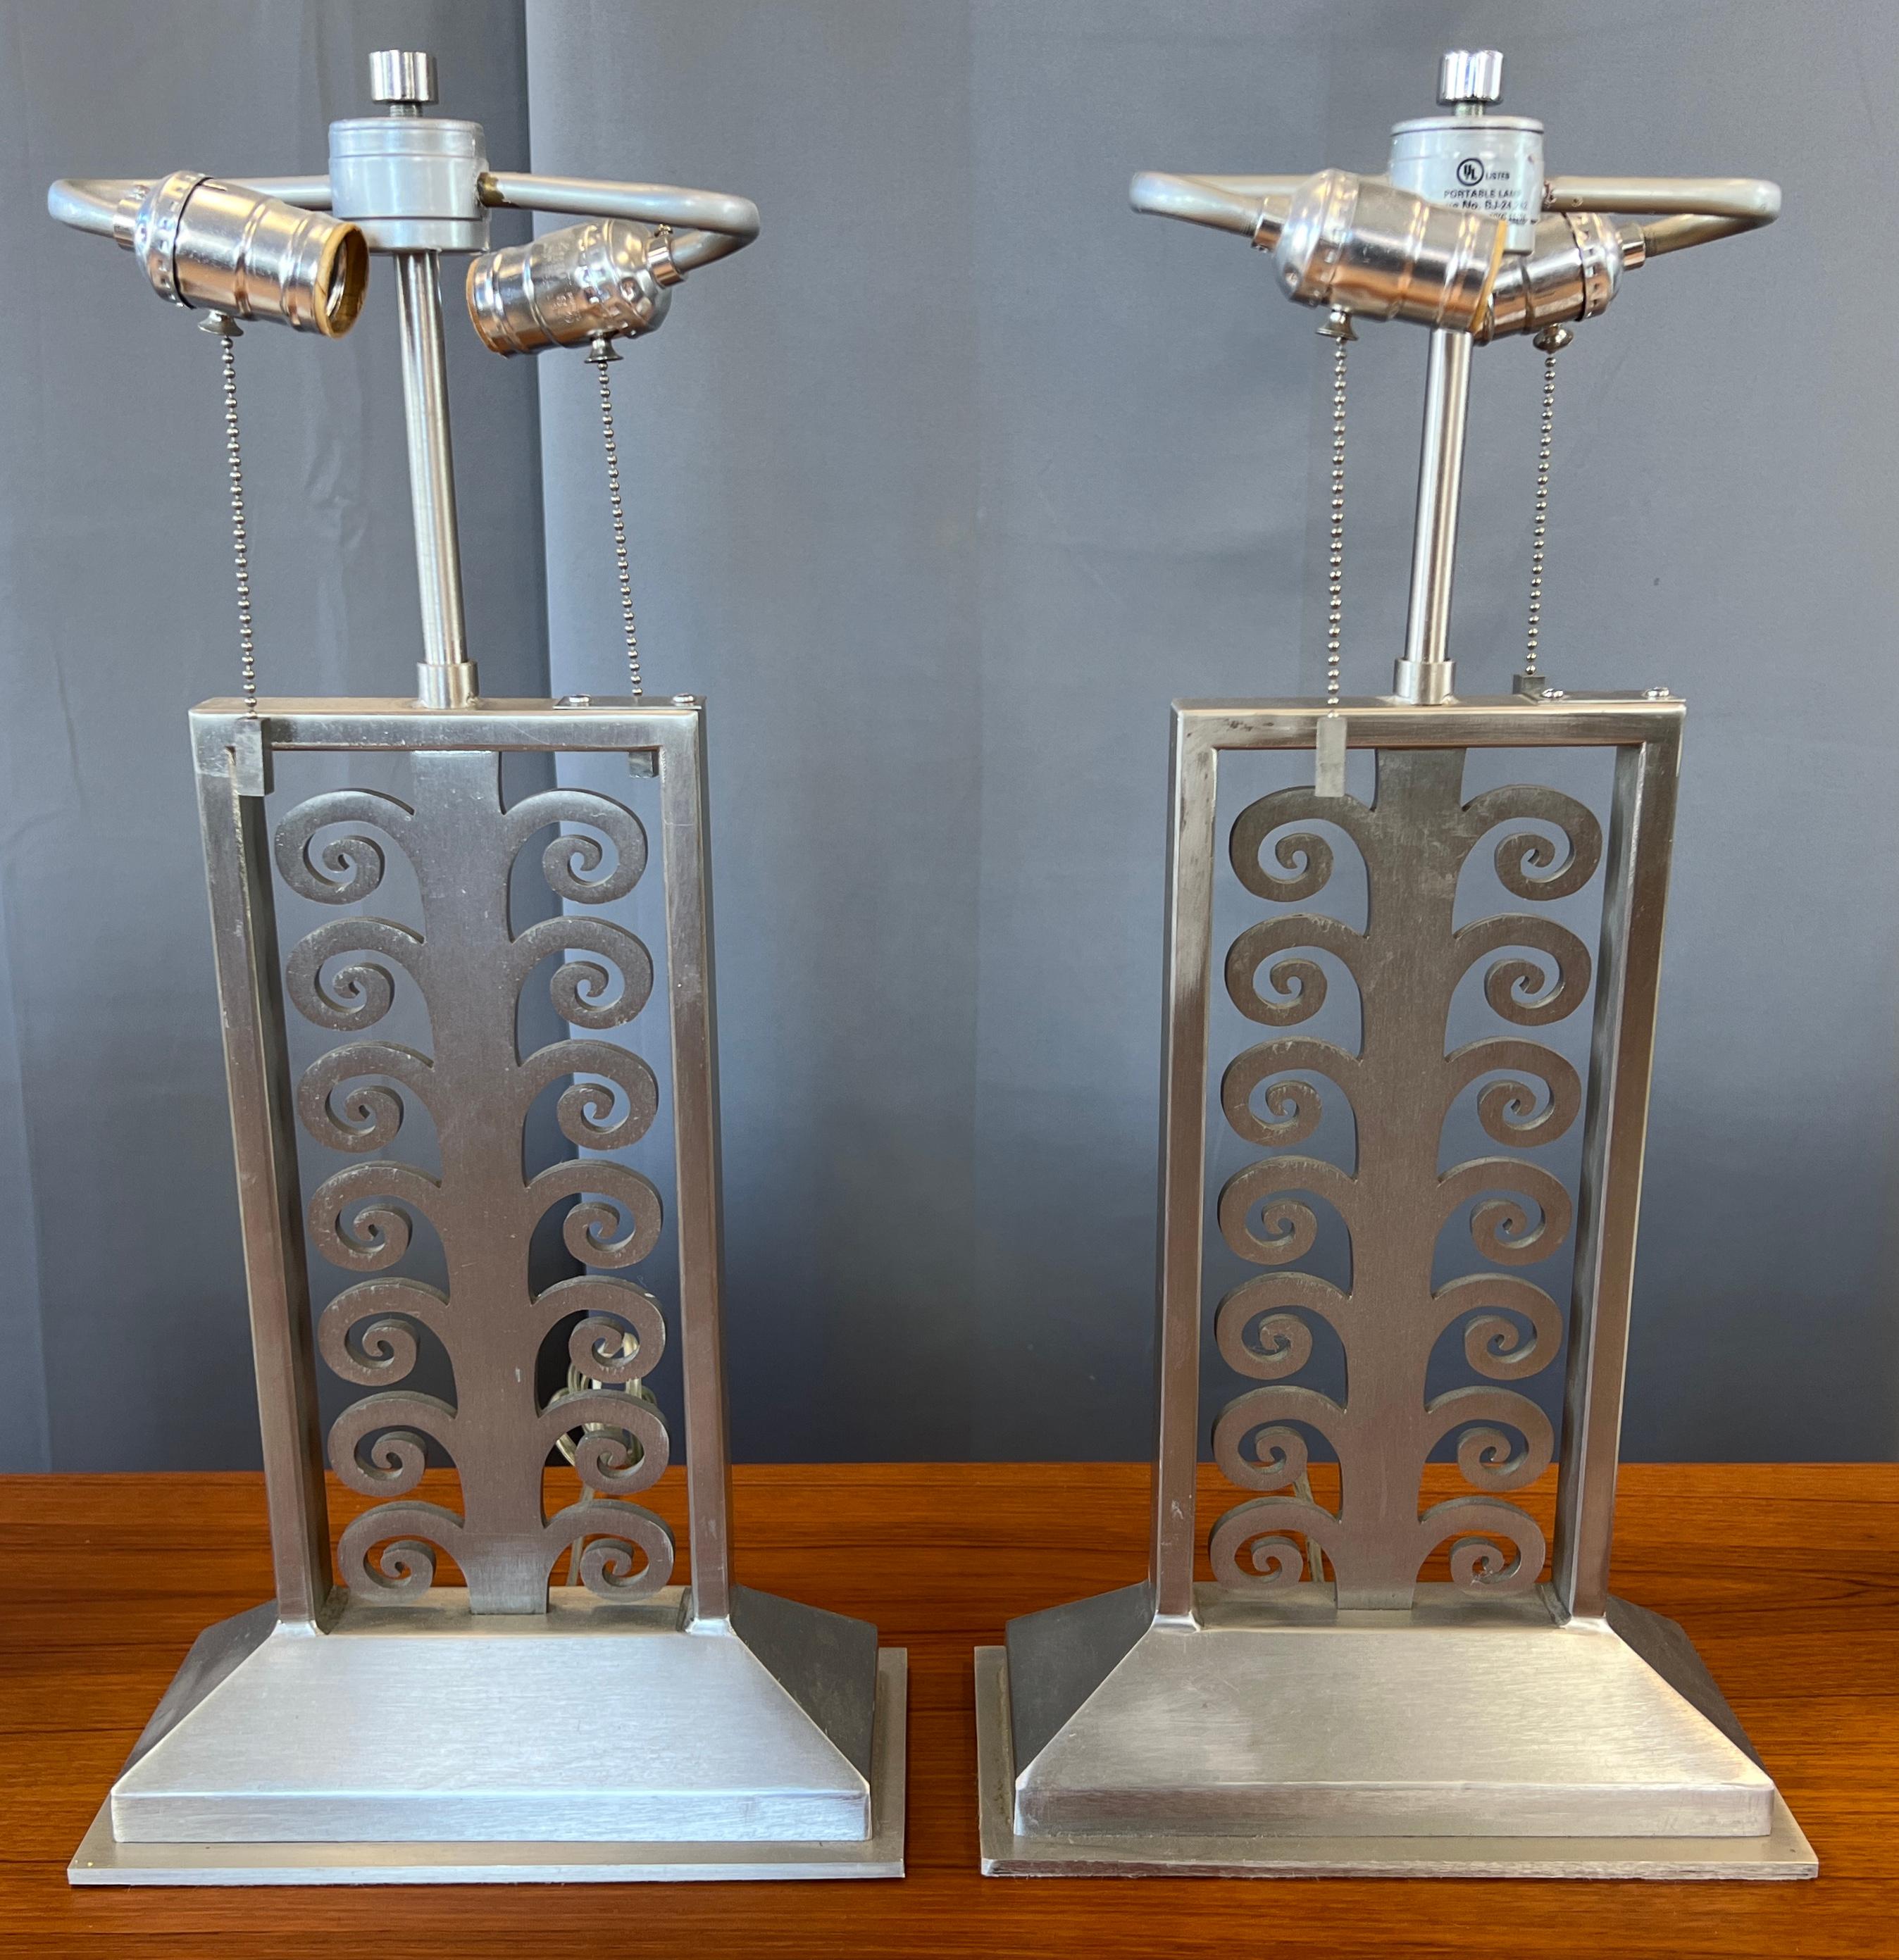 Pair of Sirmos Table Lamps in Brushed Stainless Steel In Good Condition For Sale In San Francisco, CA